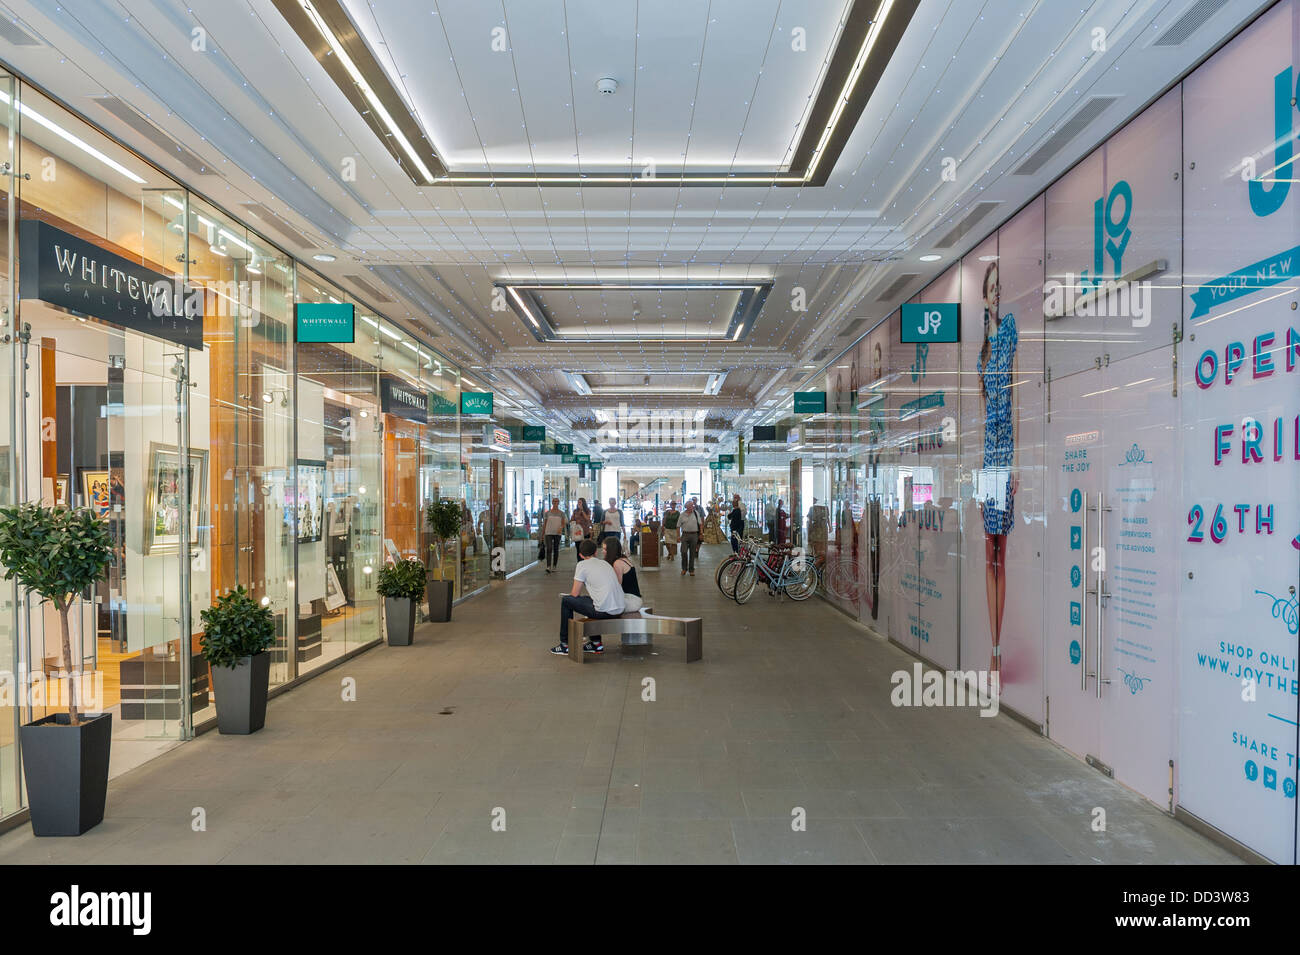 Atlanta capital of the U.S. state of Georgia, The Bath & Body Works store  in Lenox Square a shopping centre mall with well known brand name stores on  Stock Photo - Alamy